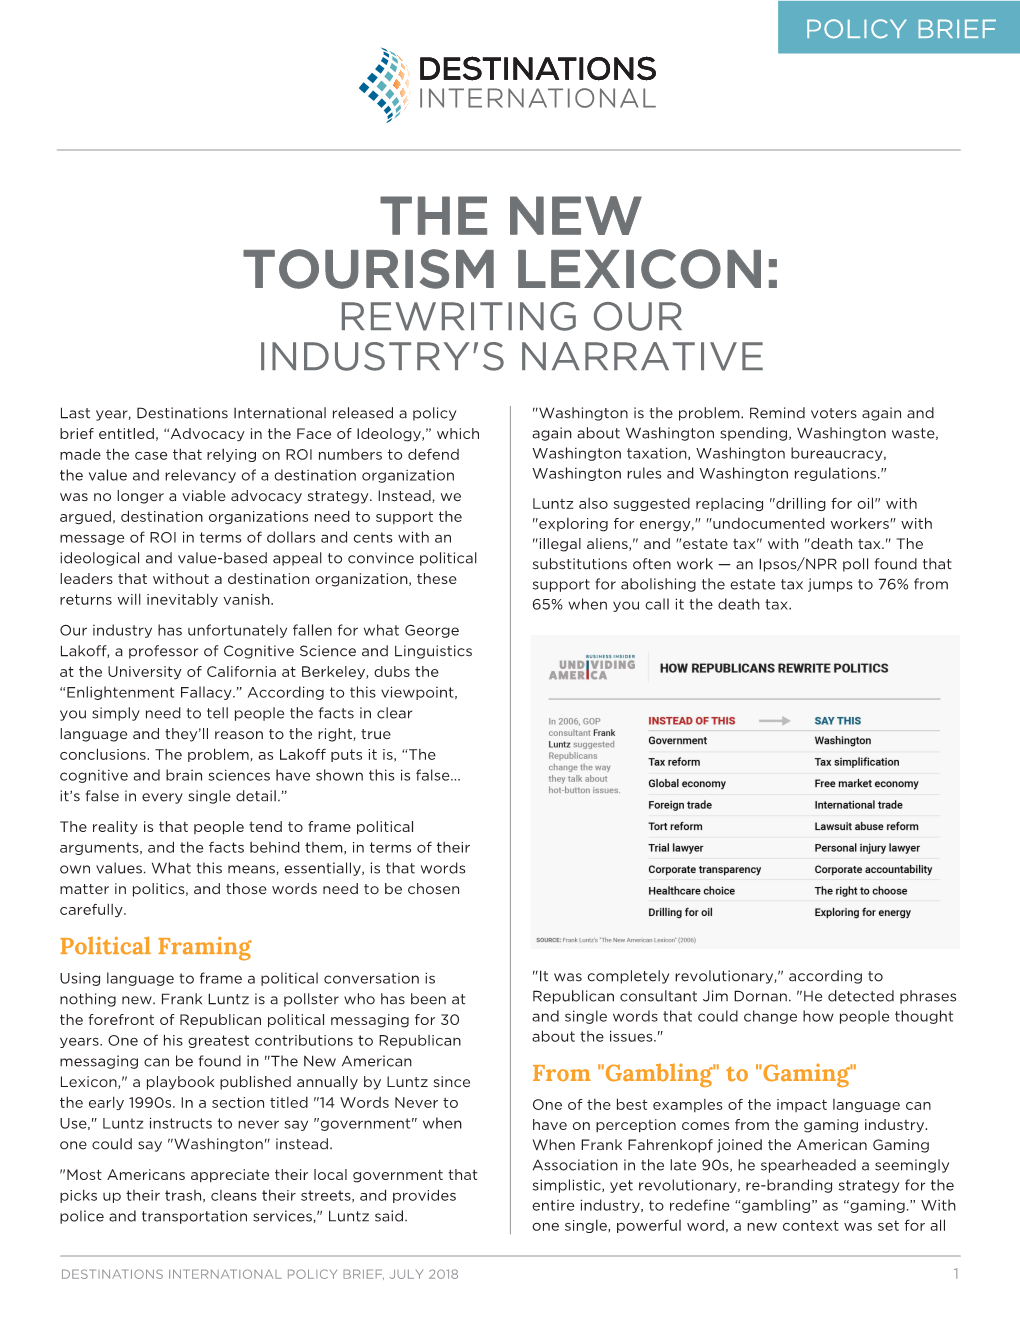 The New Tourism Lexicon: Rewriting Our Industry's Narrative